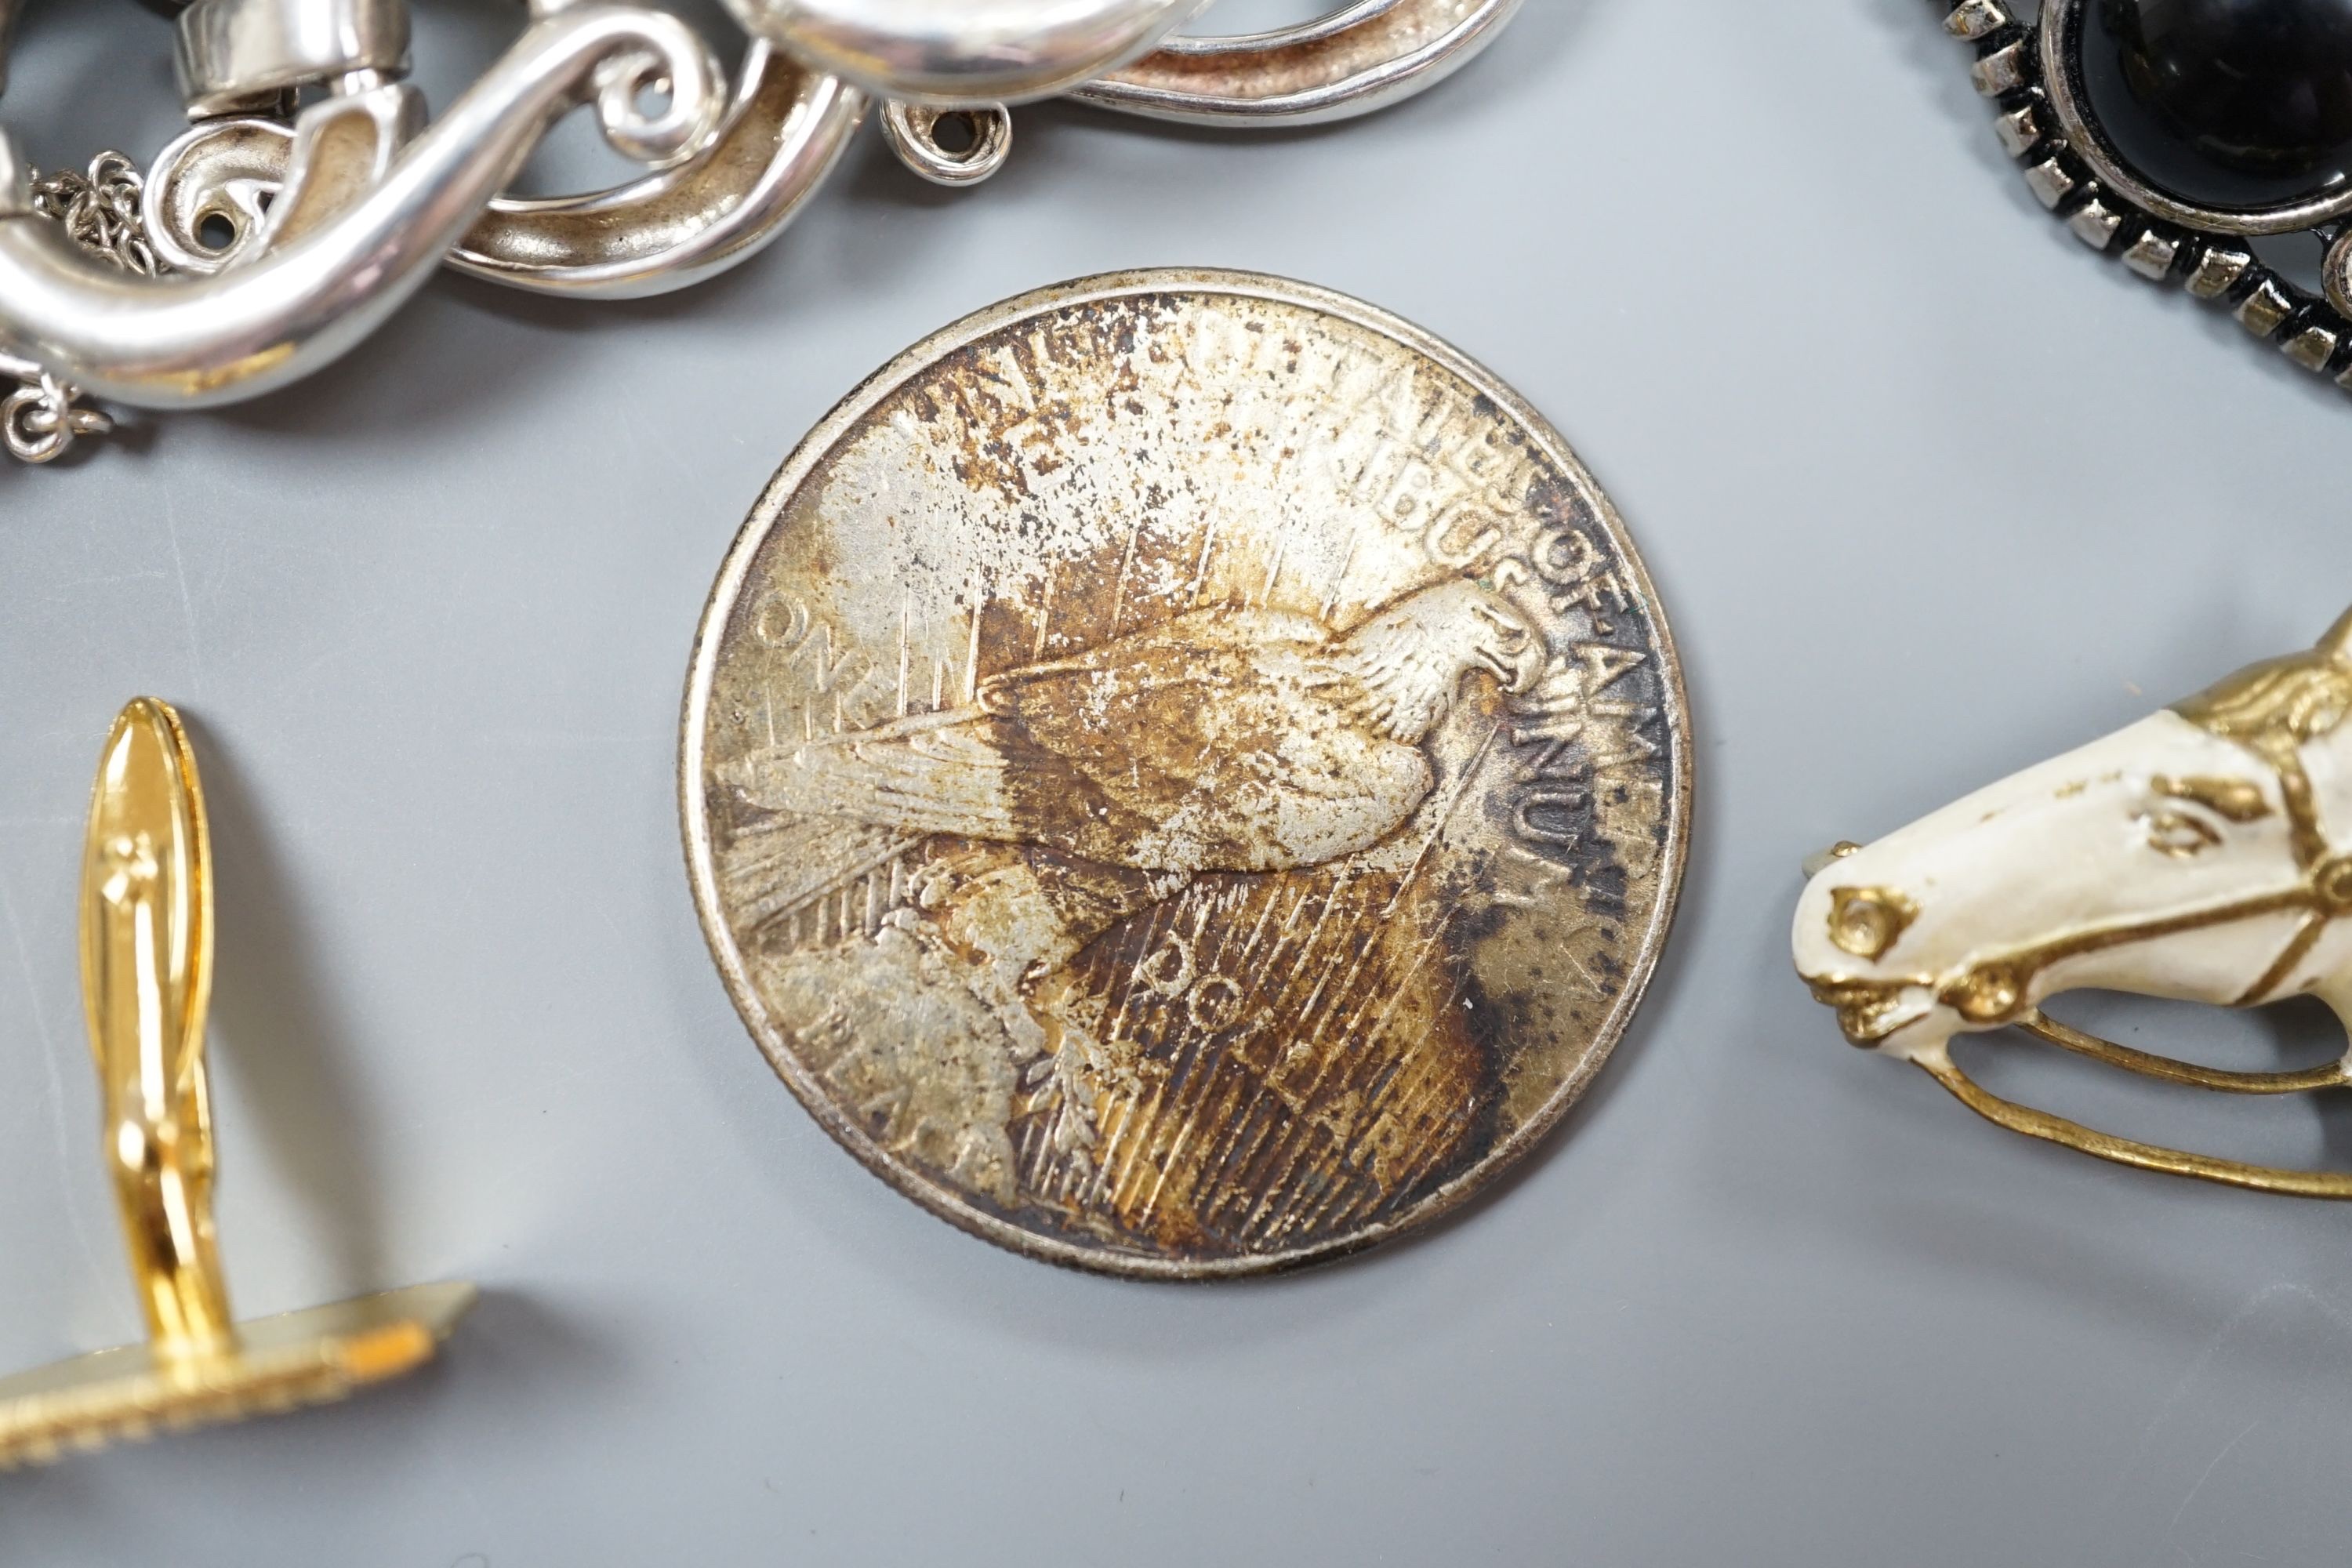 A white metal bracelet and minor jewellery and coins.